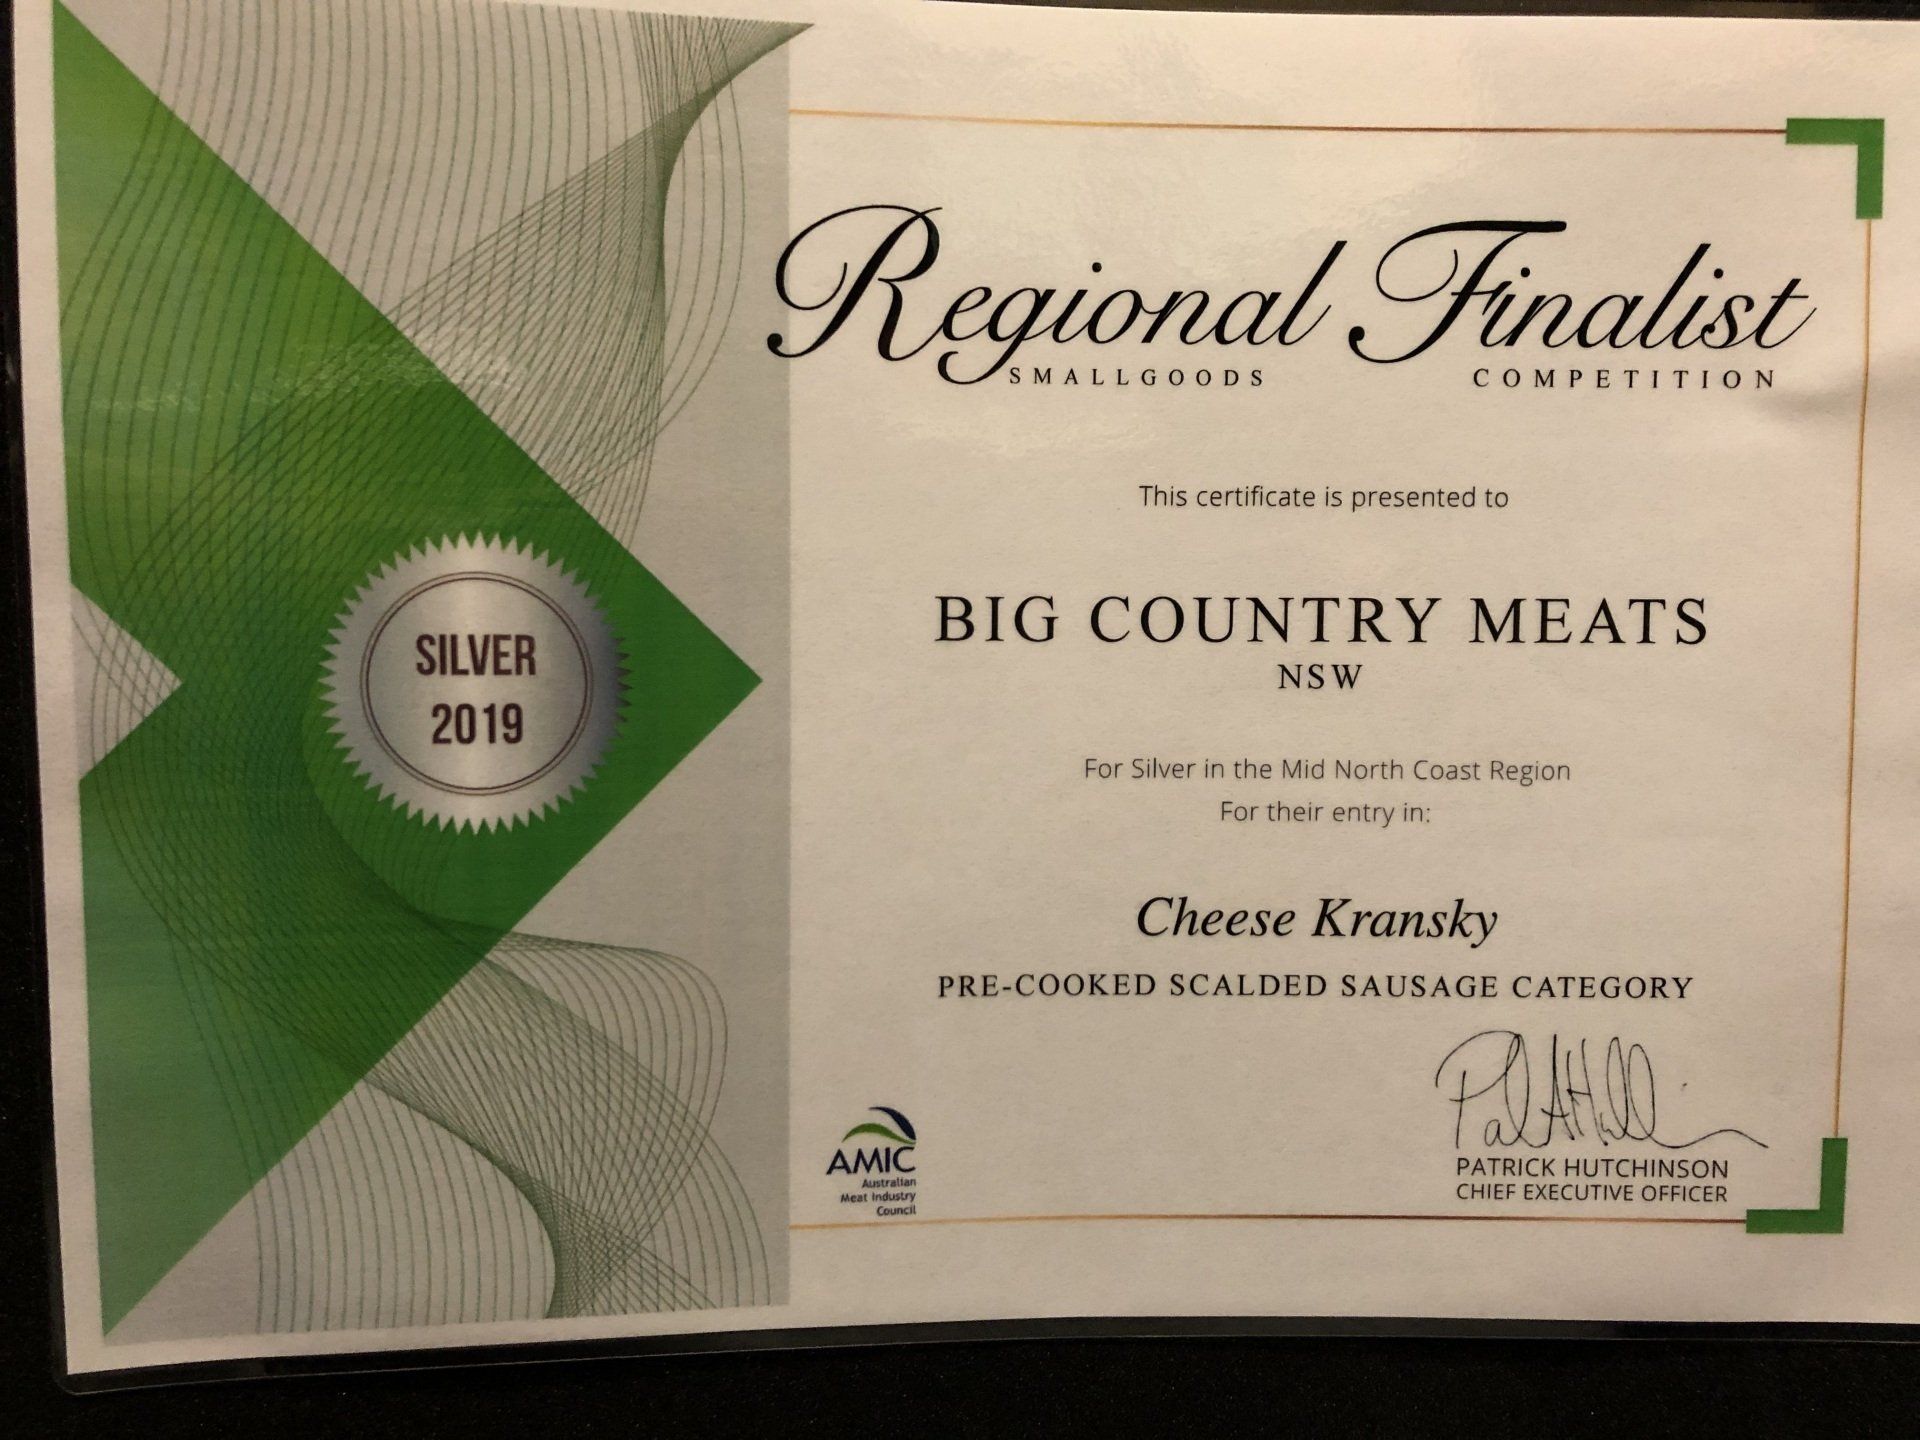 Silver in the 2019 Regional Smallgoods Competition for Cheese Kransky